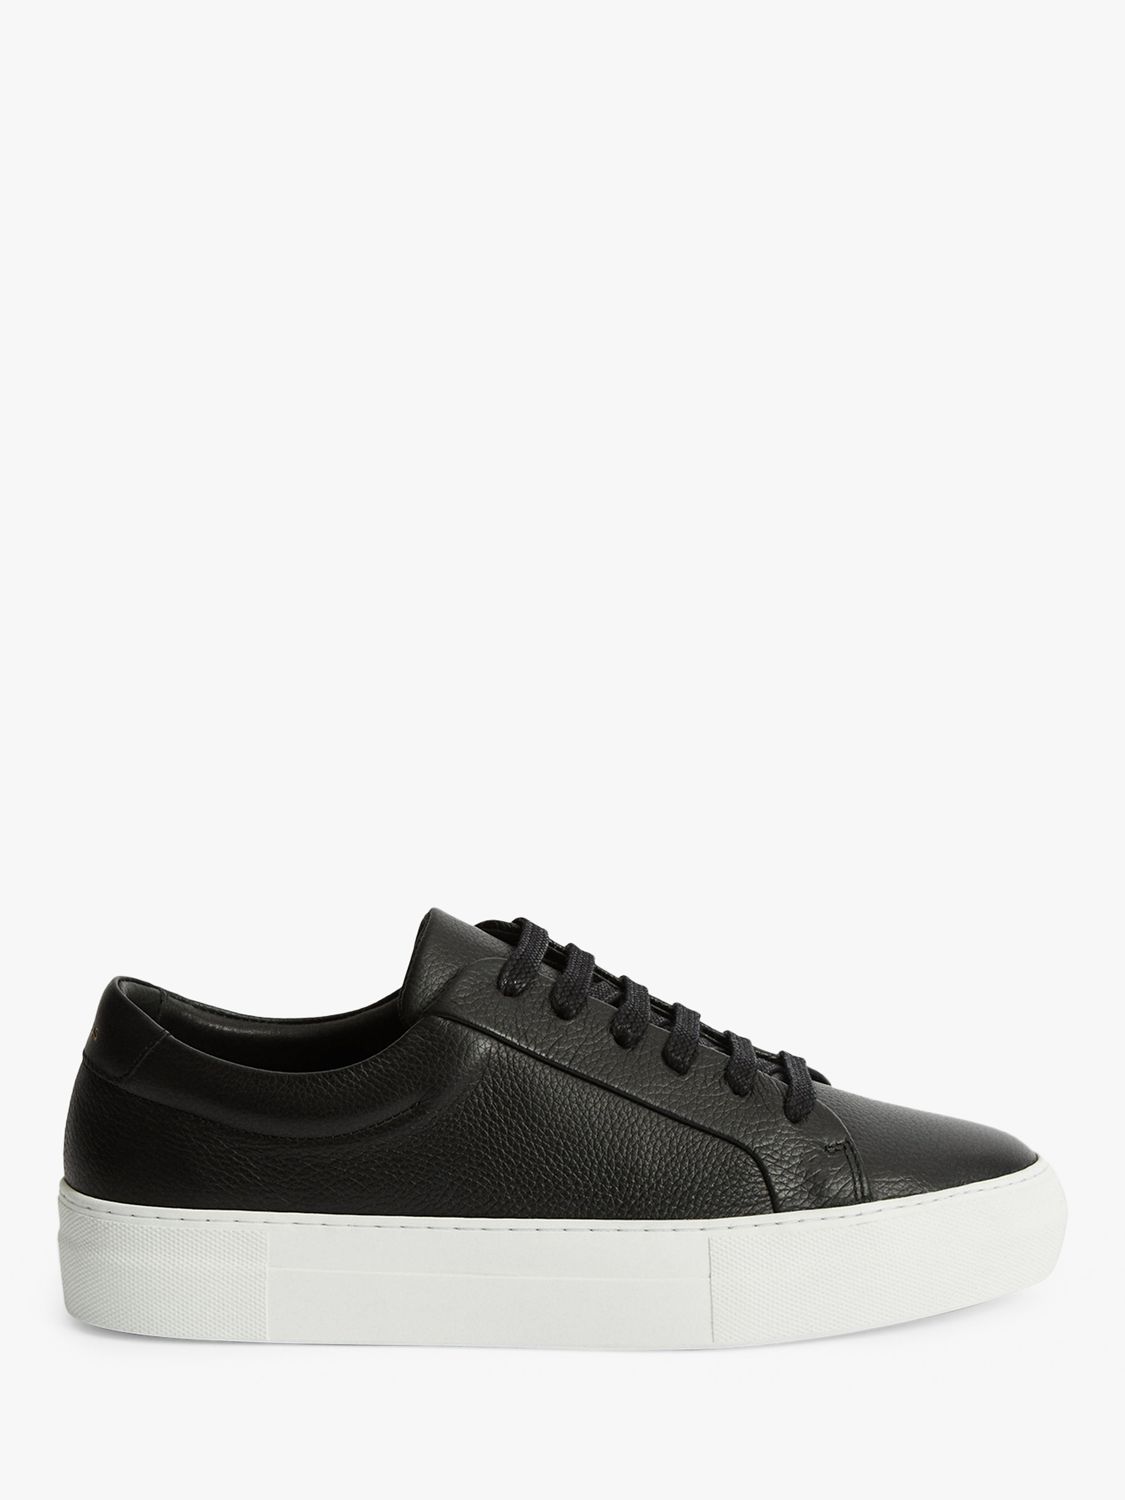 Reiss Luca Tumbled Leather Trainers, Black